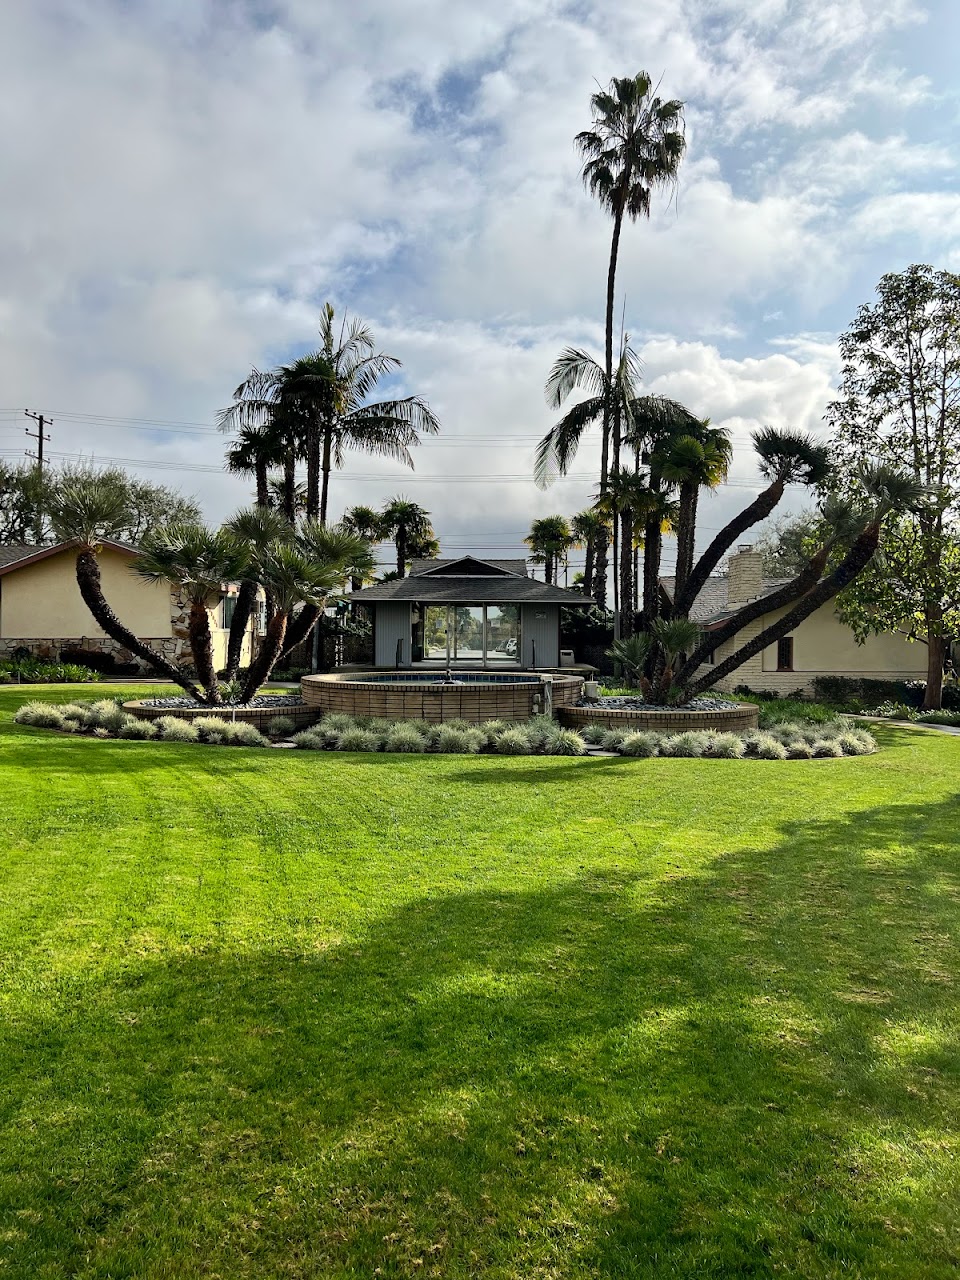 Photo of FAMILY COMMONS AT CABRILLO at 2111 W WILLIAMS ST LONG BEACH, CA 90810